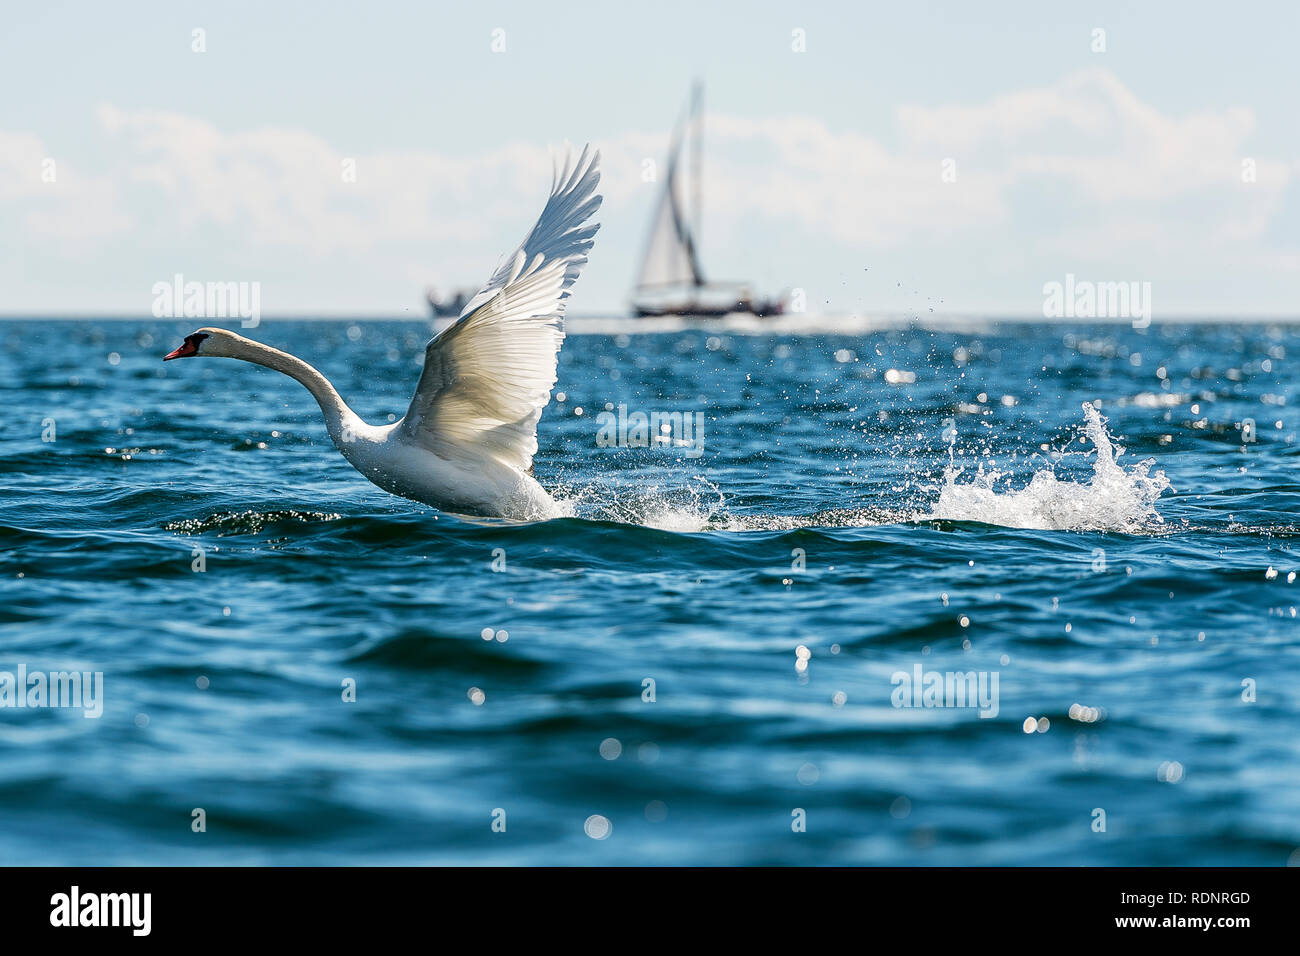 Swan and sailboat in sea Stock Photo